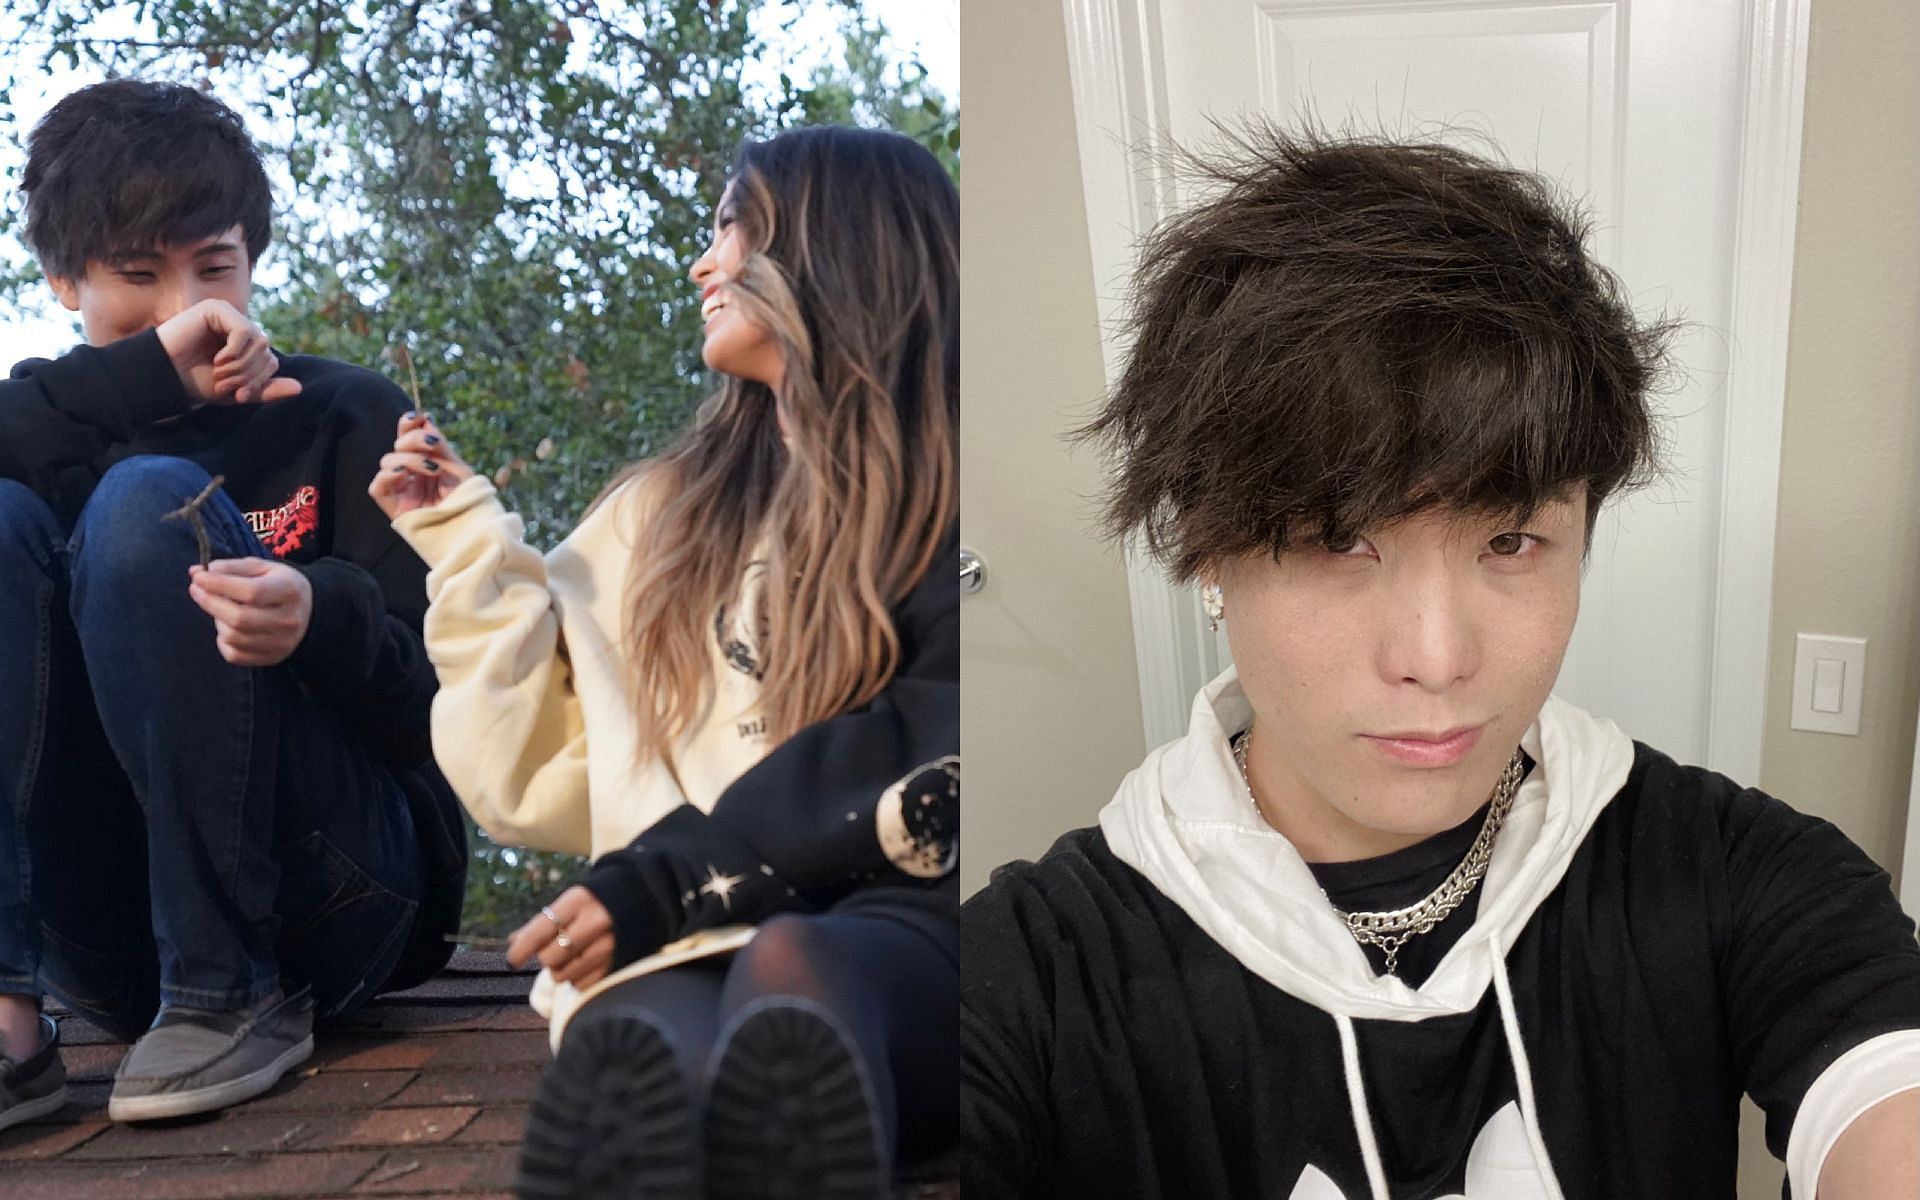 Sykkuno reveals why he was not playing with Valkyrae and Disguised Toast during a recent stream (Images via Sykkuno and Valkyrae/Twitter)